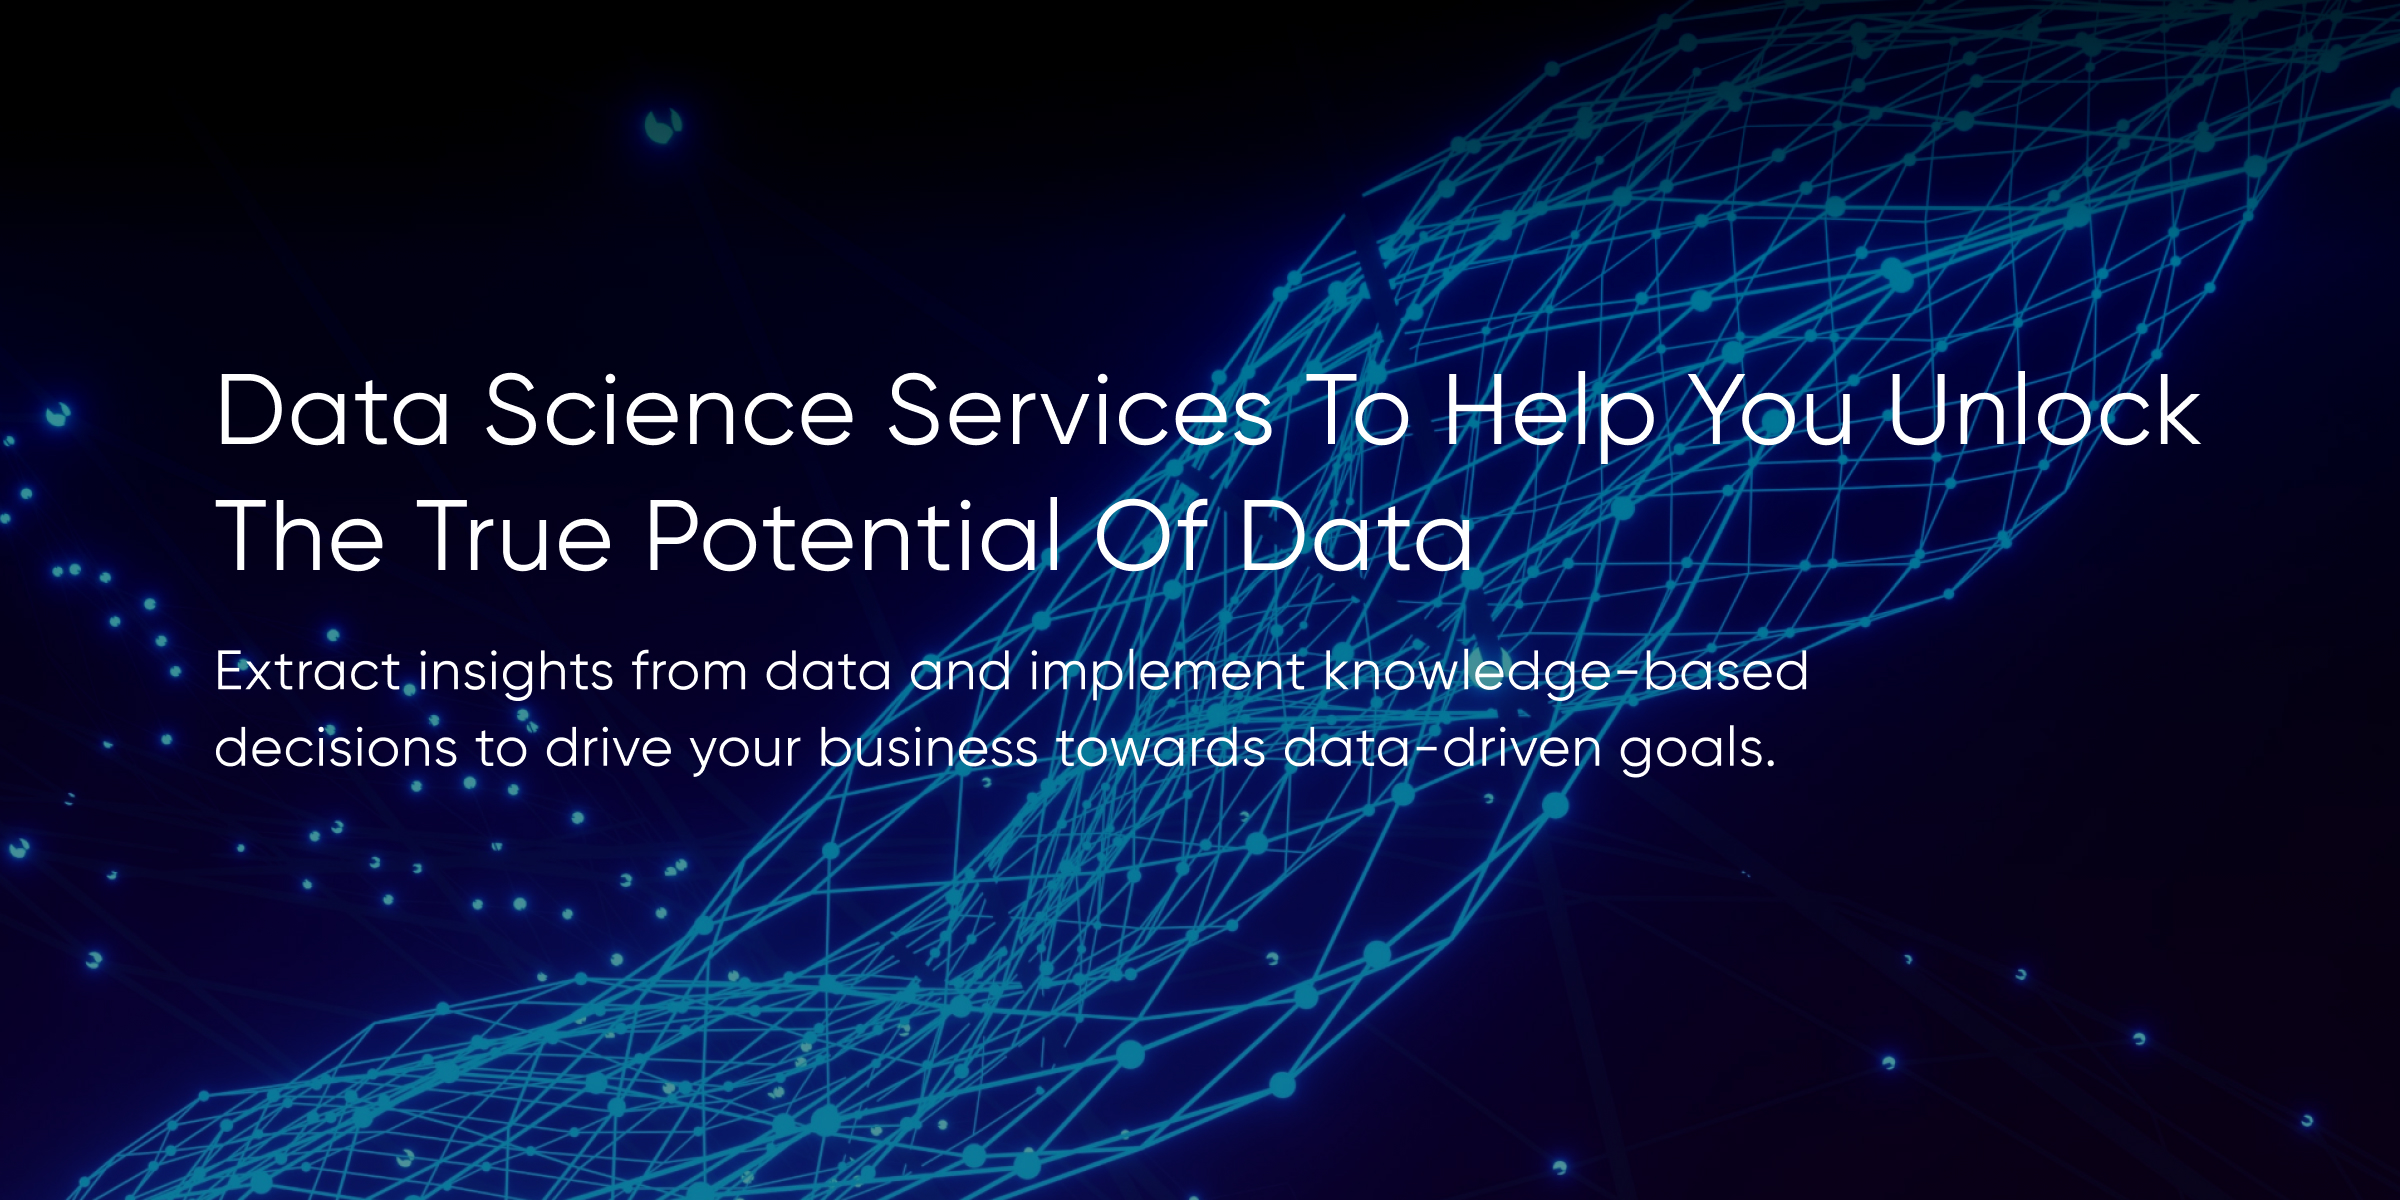 Data Science Services, Data Science Consulting - NeoSOFT